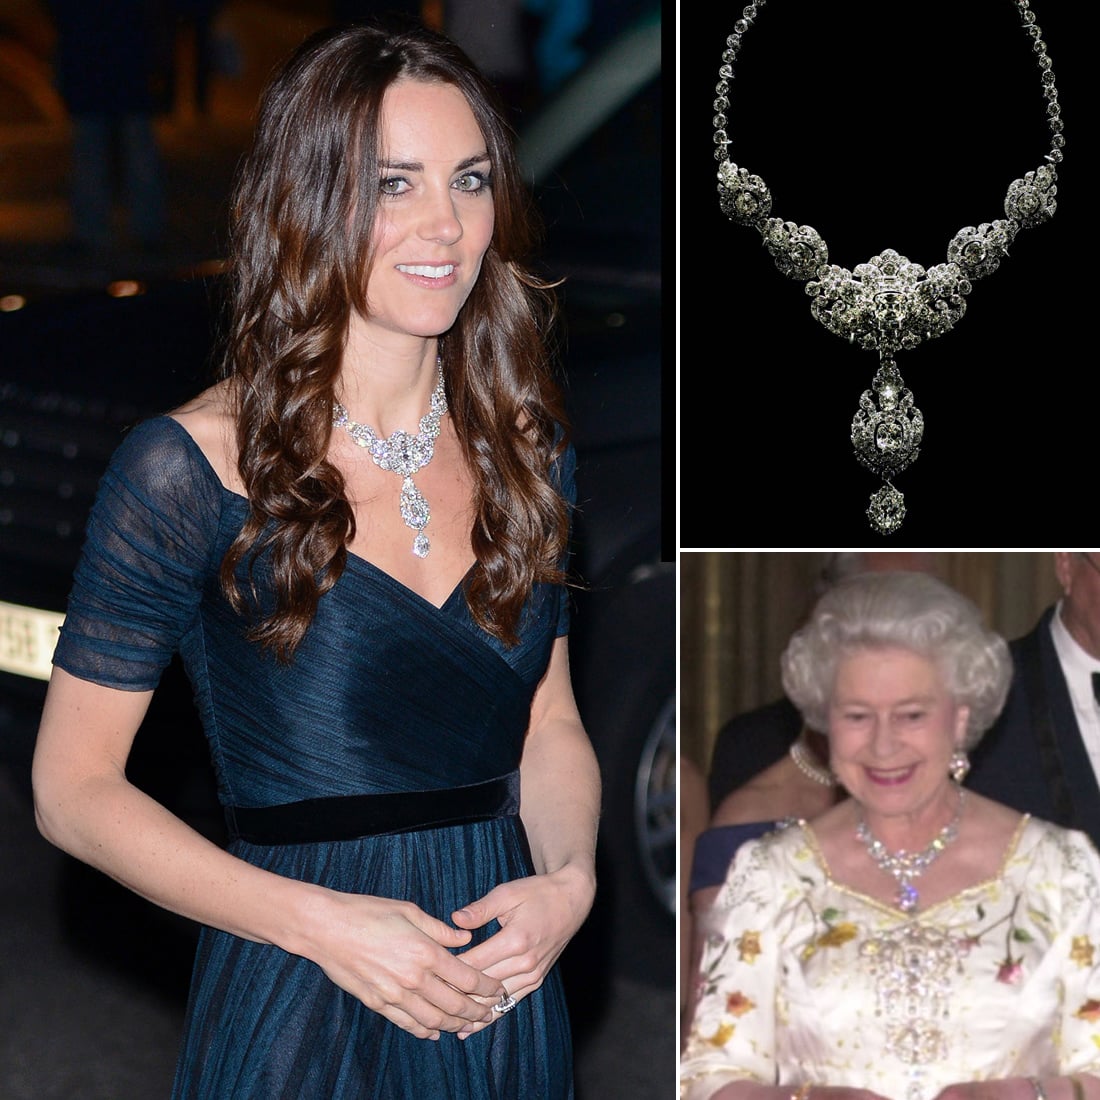 Did You Know? Queen Elizabeth II Got A Necklace With 300 Diamonds From ...